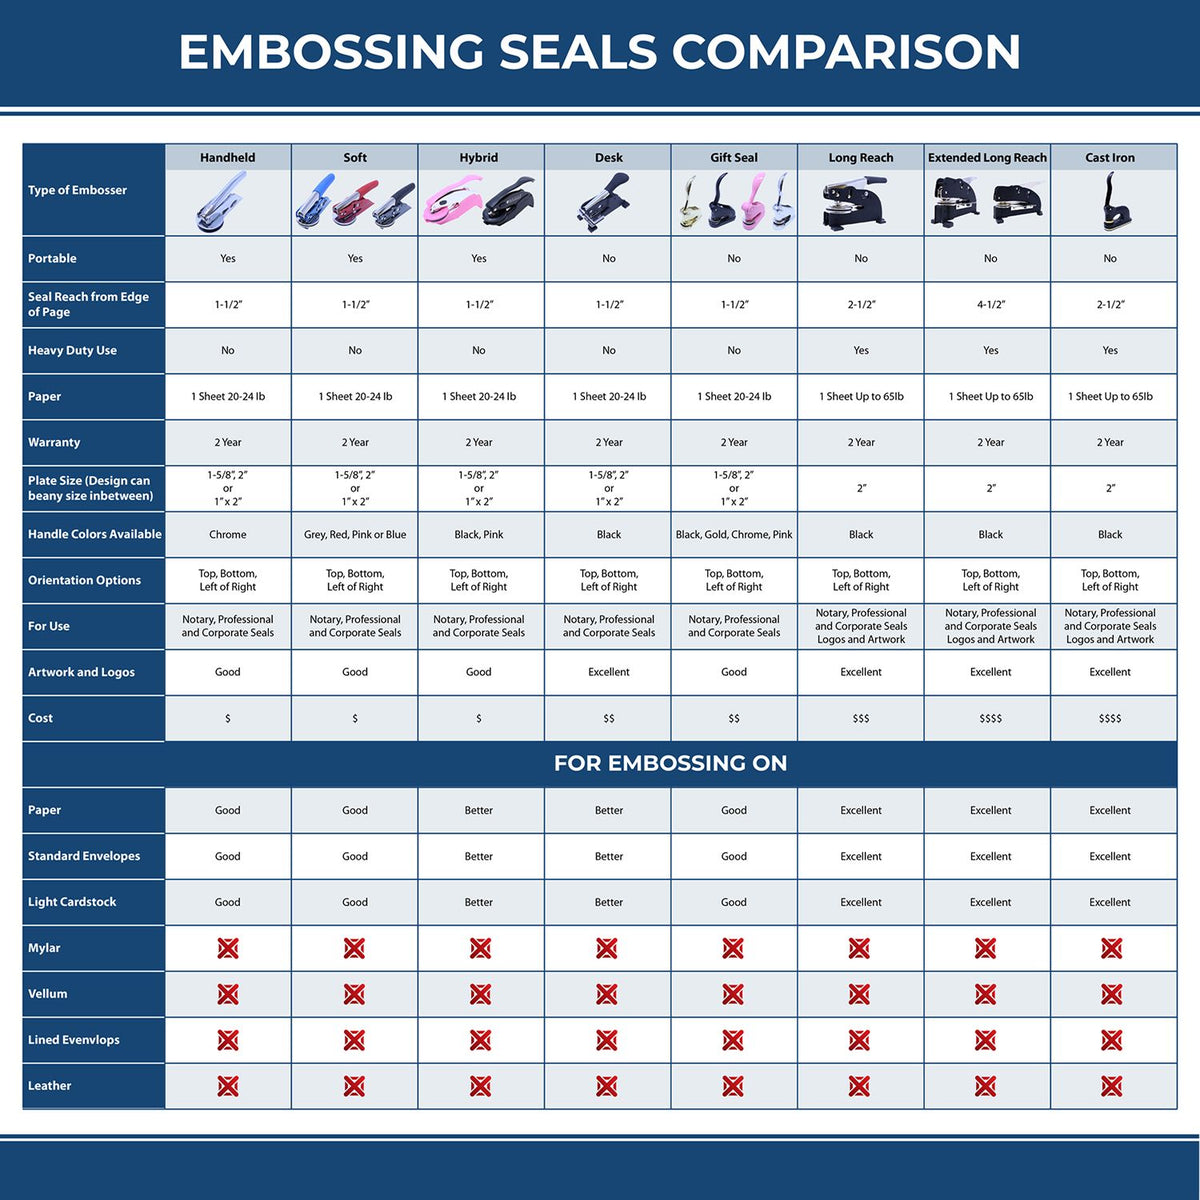 A comparison chart for the different types of mount models available for the Soft Utah Professional Engineer Seal.